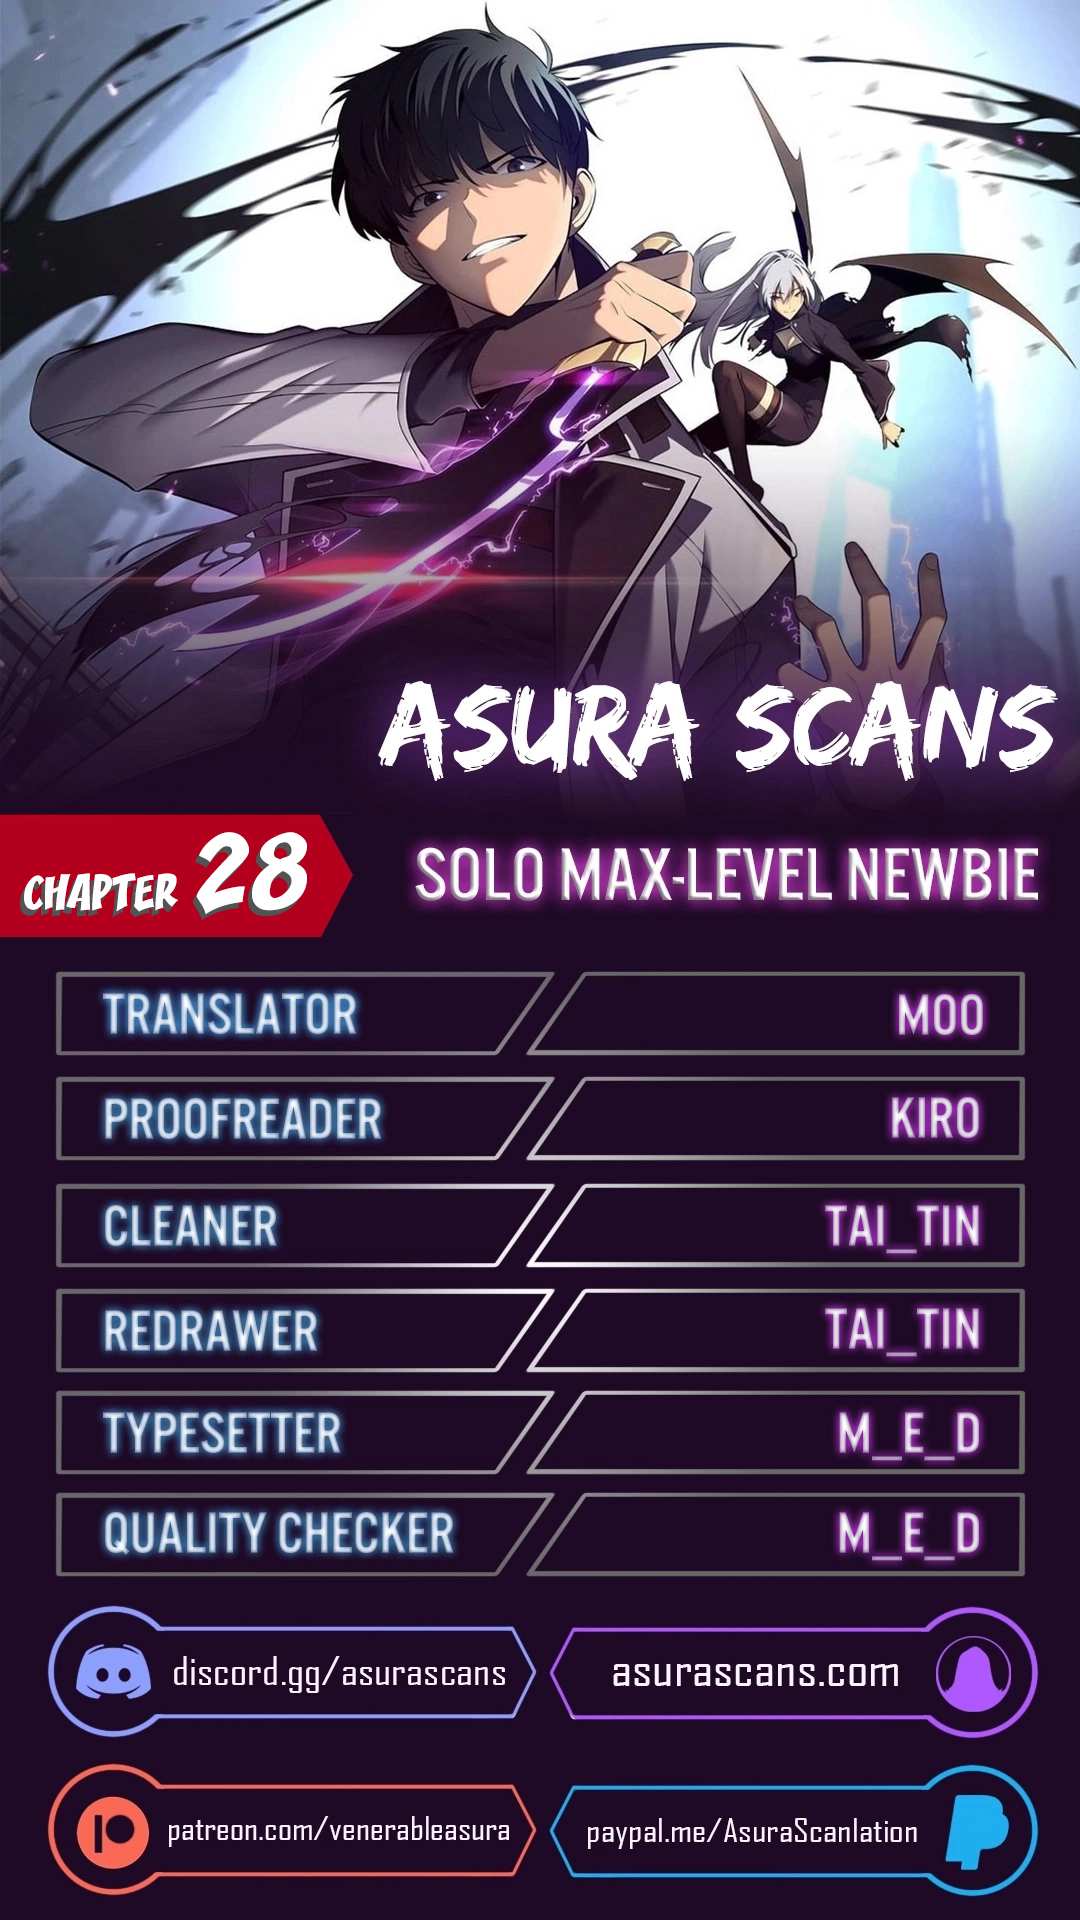 Solo Max-Level Newbie Chapter 28